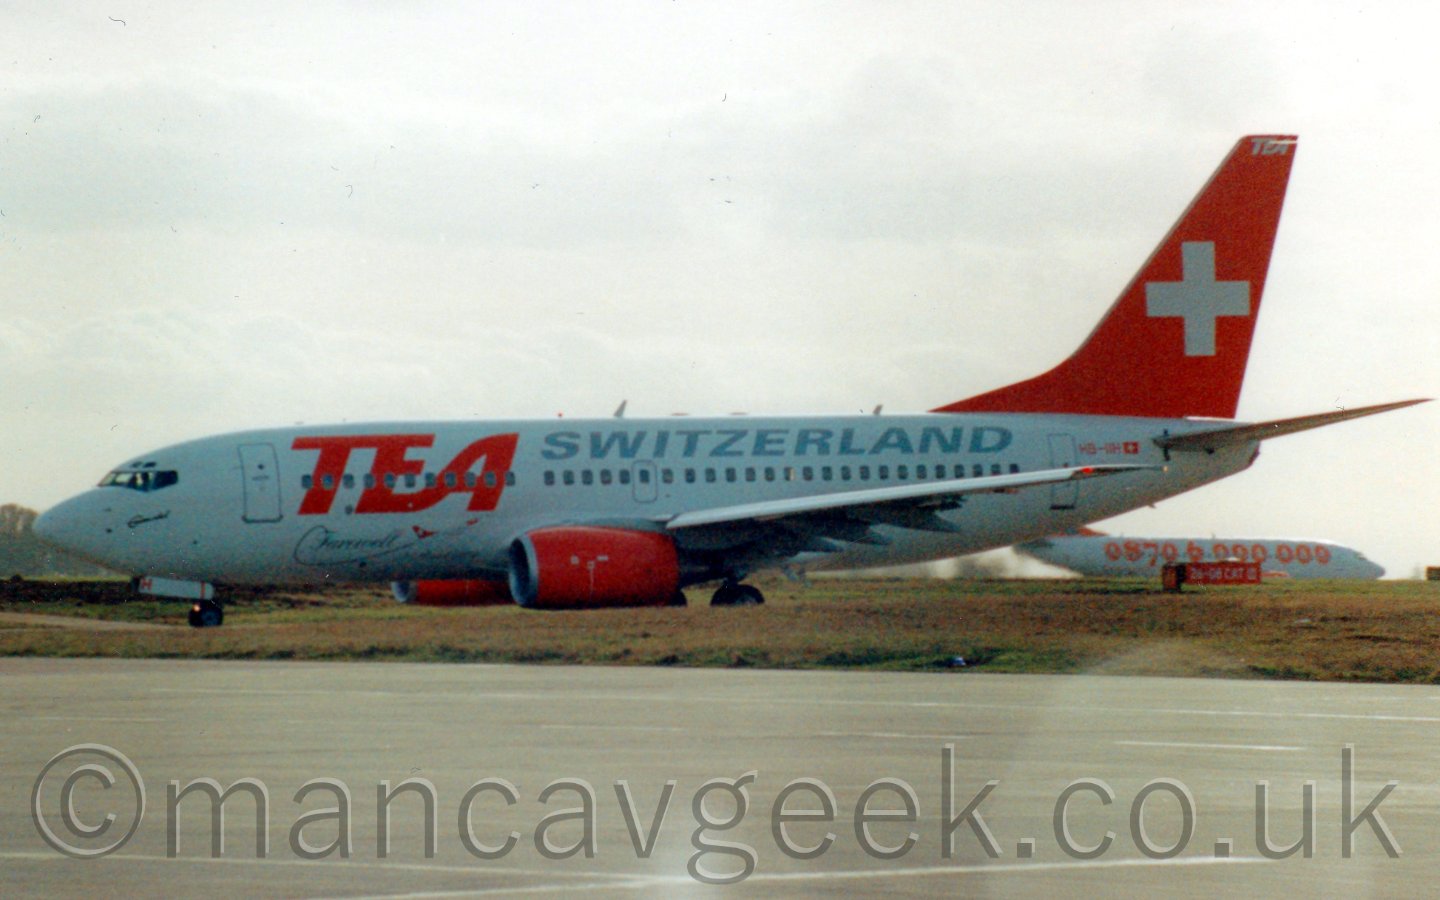 Side view of a twin engined jet airliner taxiing from right to left. The planes body is almost entirely white, with ted billboard-style "TEA" titles covering the cabin windows on the forward fuselage, with grey "Swizerland" titles above the windows on the rear fuselage. The engine pods and tail are red, with a large white cross on the tail. Large grassed areas run towards the camera in the foreground, and off into the distance in the background. Another white jet airliner with orange "0870 6 000 000" titles along the fuselage is visible in the background, just under the tail of this plane on the middle right of the frame. Above, the sky is a bright yet hazy grey.